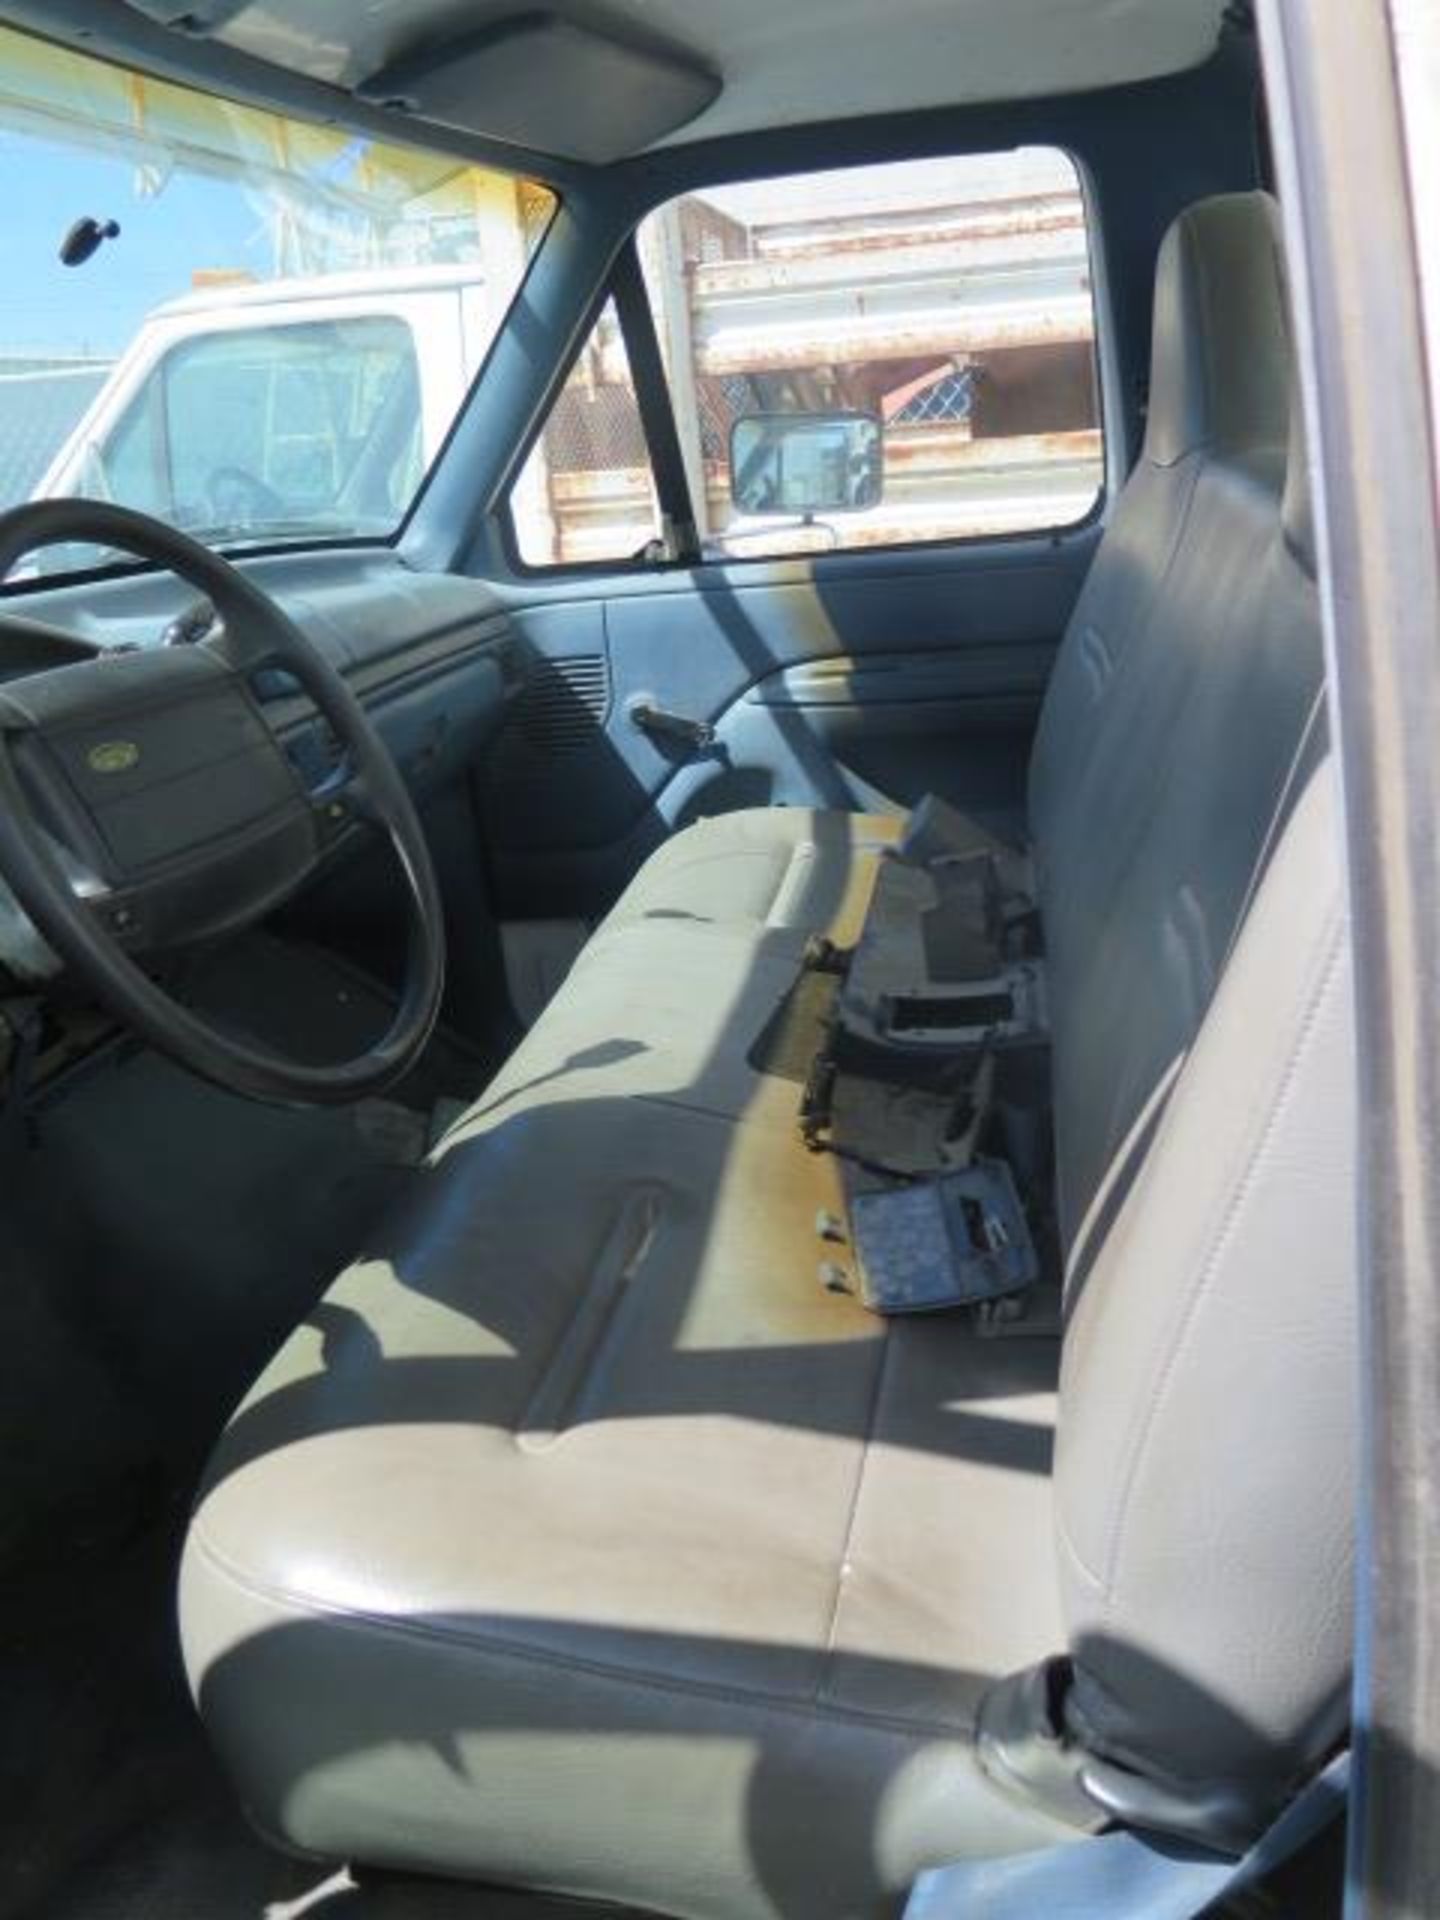 1995 Ford F-250XL Service Truck w/ Gas Engine, Automatic Trans, AC Vin# 1FTEF25N15NB11666,SOLD AS IS - Image 6 of 11